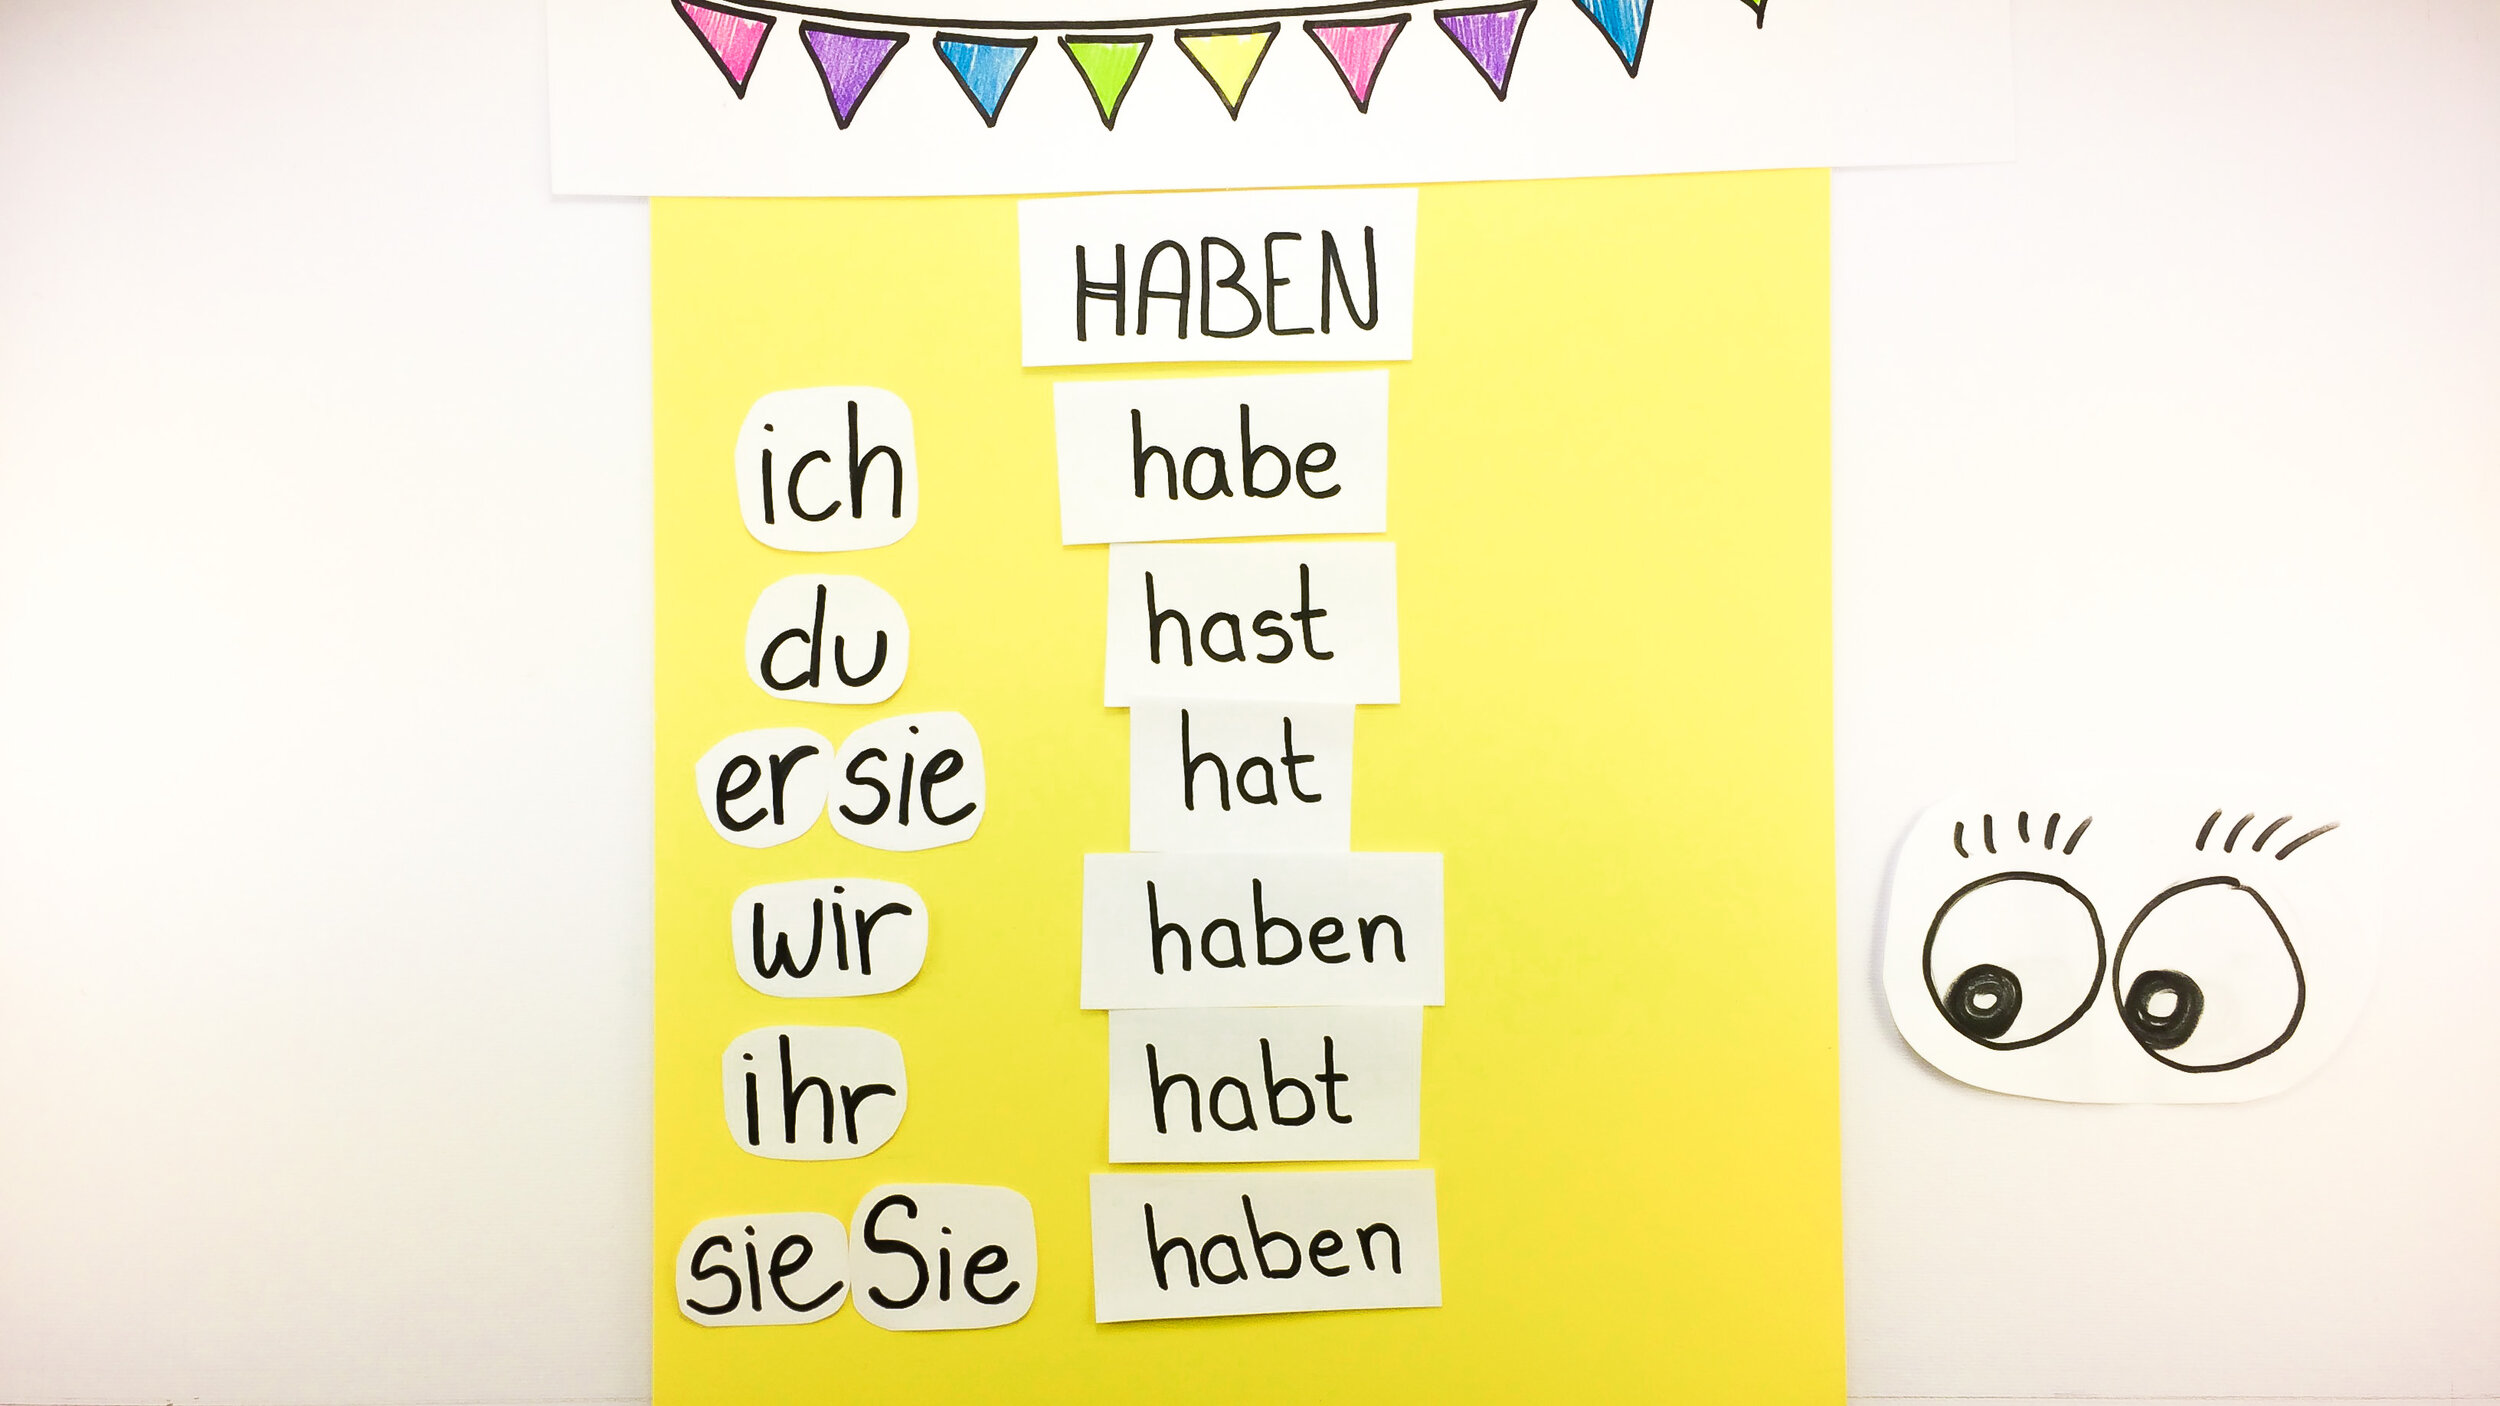 Mastering The Art Of Distinguishing German Words: Habe, Hat, Haben, And Hast